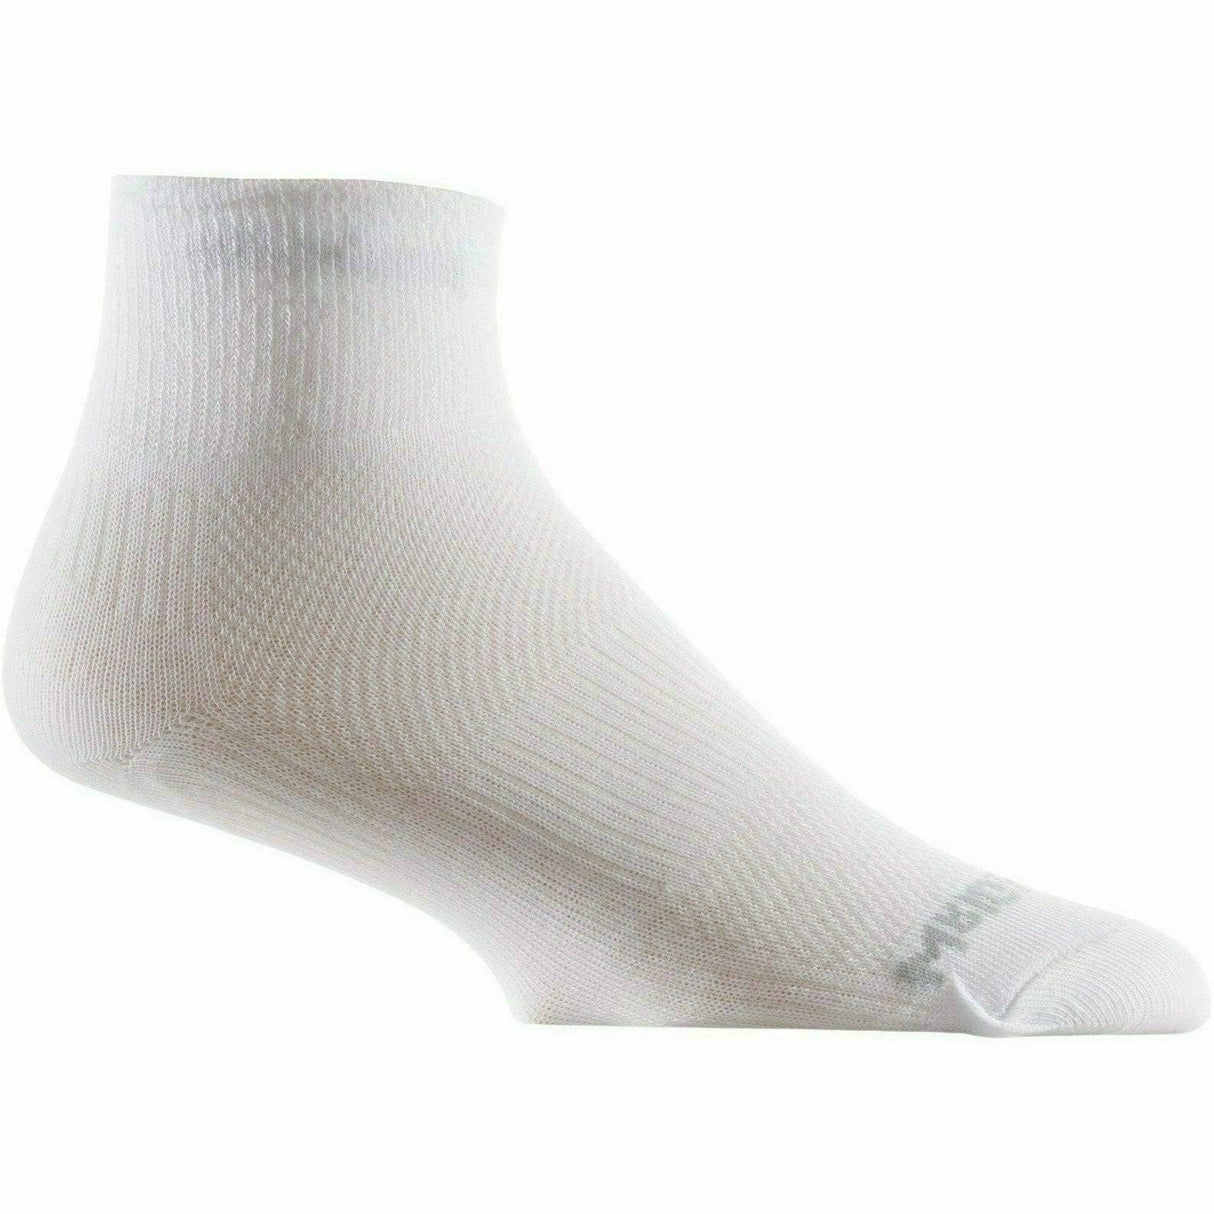 Wrightsock Double-Layer Coolmesh II Lightweight Quarter Socks  -  Small / White / 2-Pair Pack